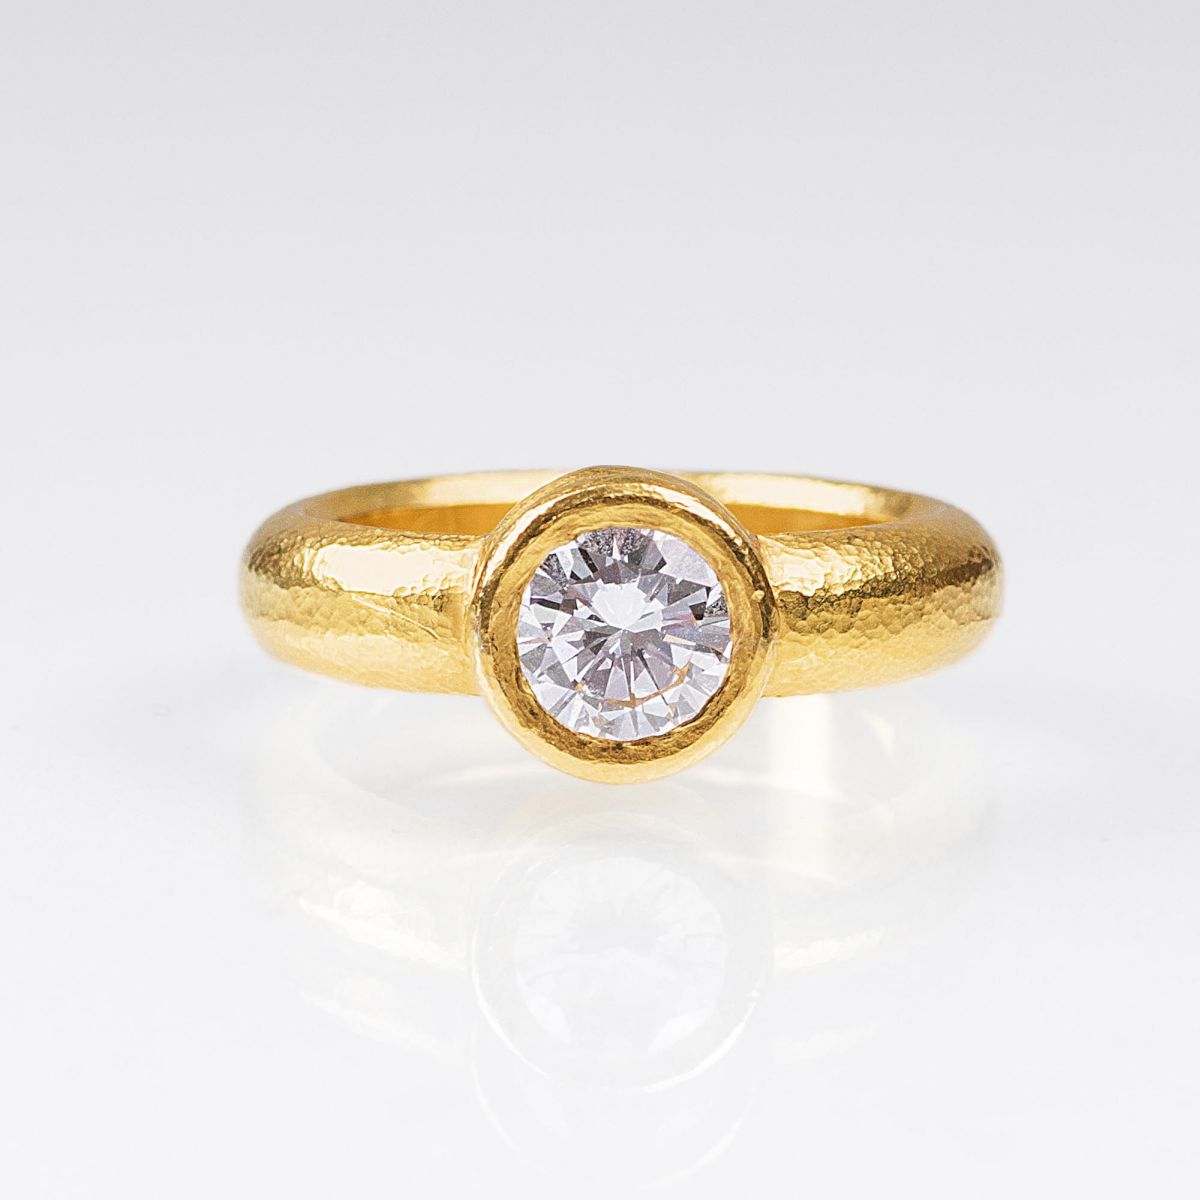 A highcarat Solitaire Ring by Armin Haase